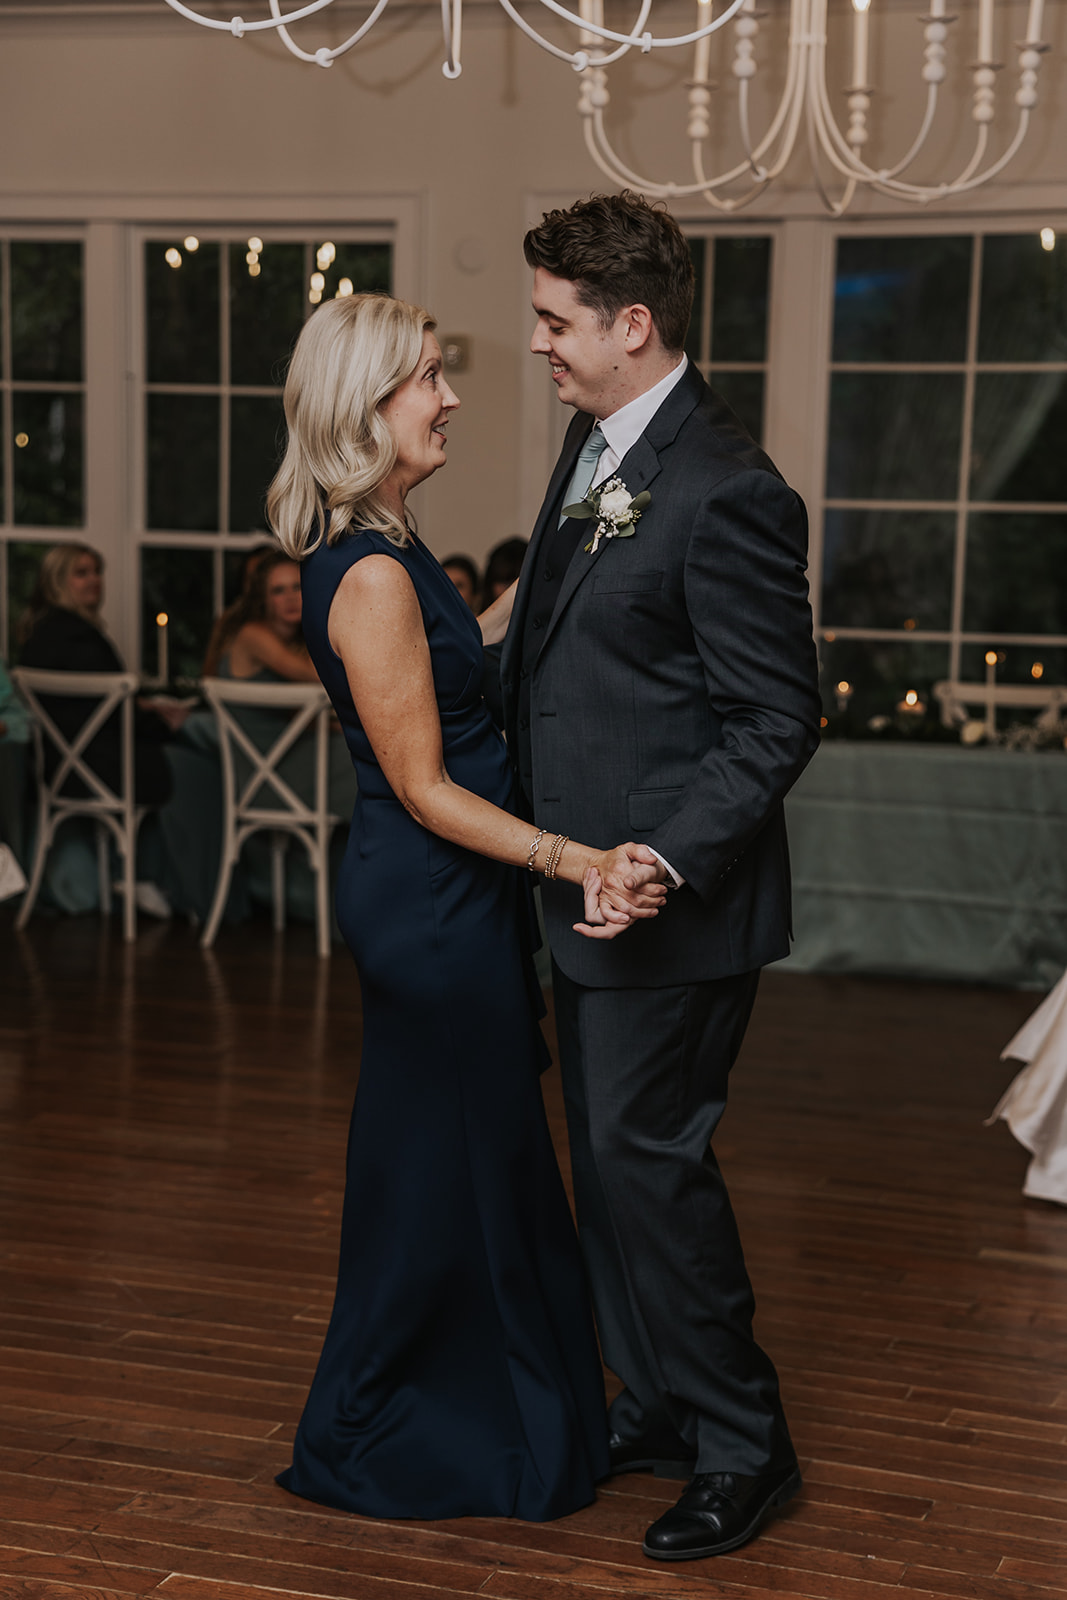 Groom and his mom share a dance together